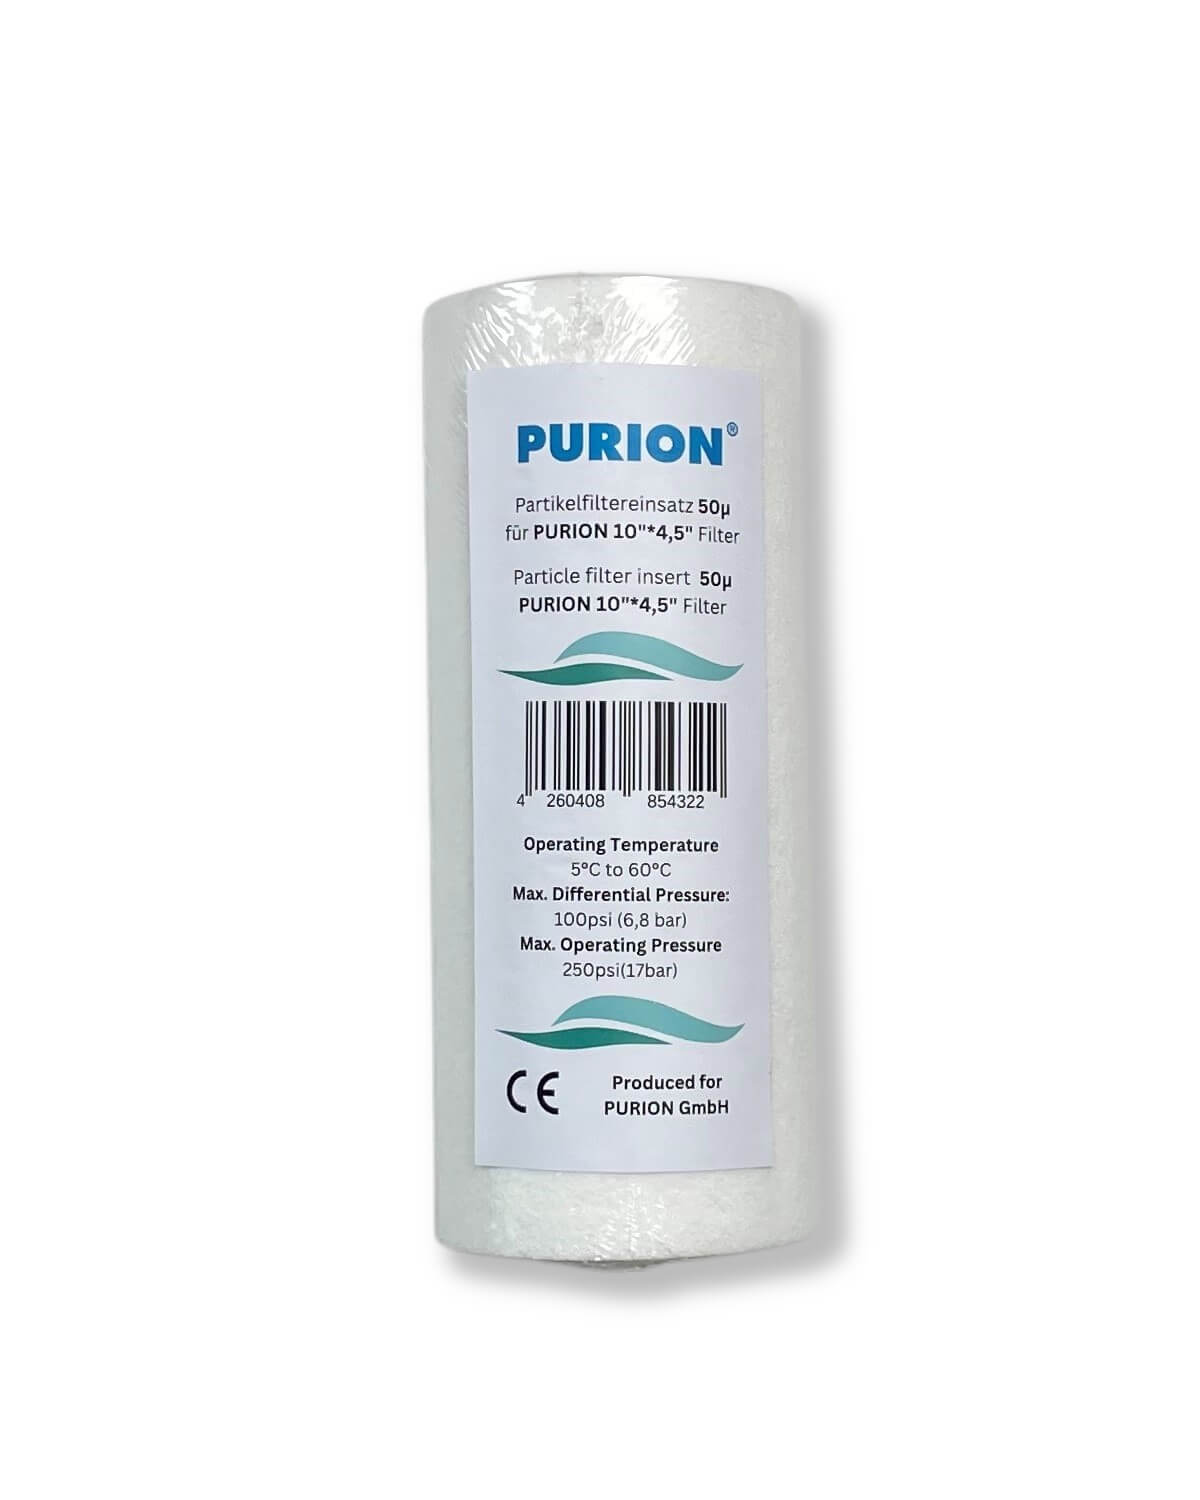 PURION Filter Cartridge Big Blue 10x4.5 inch Suspended Solids 50 Micron